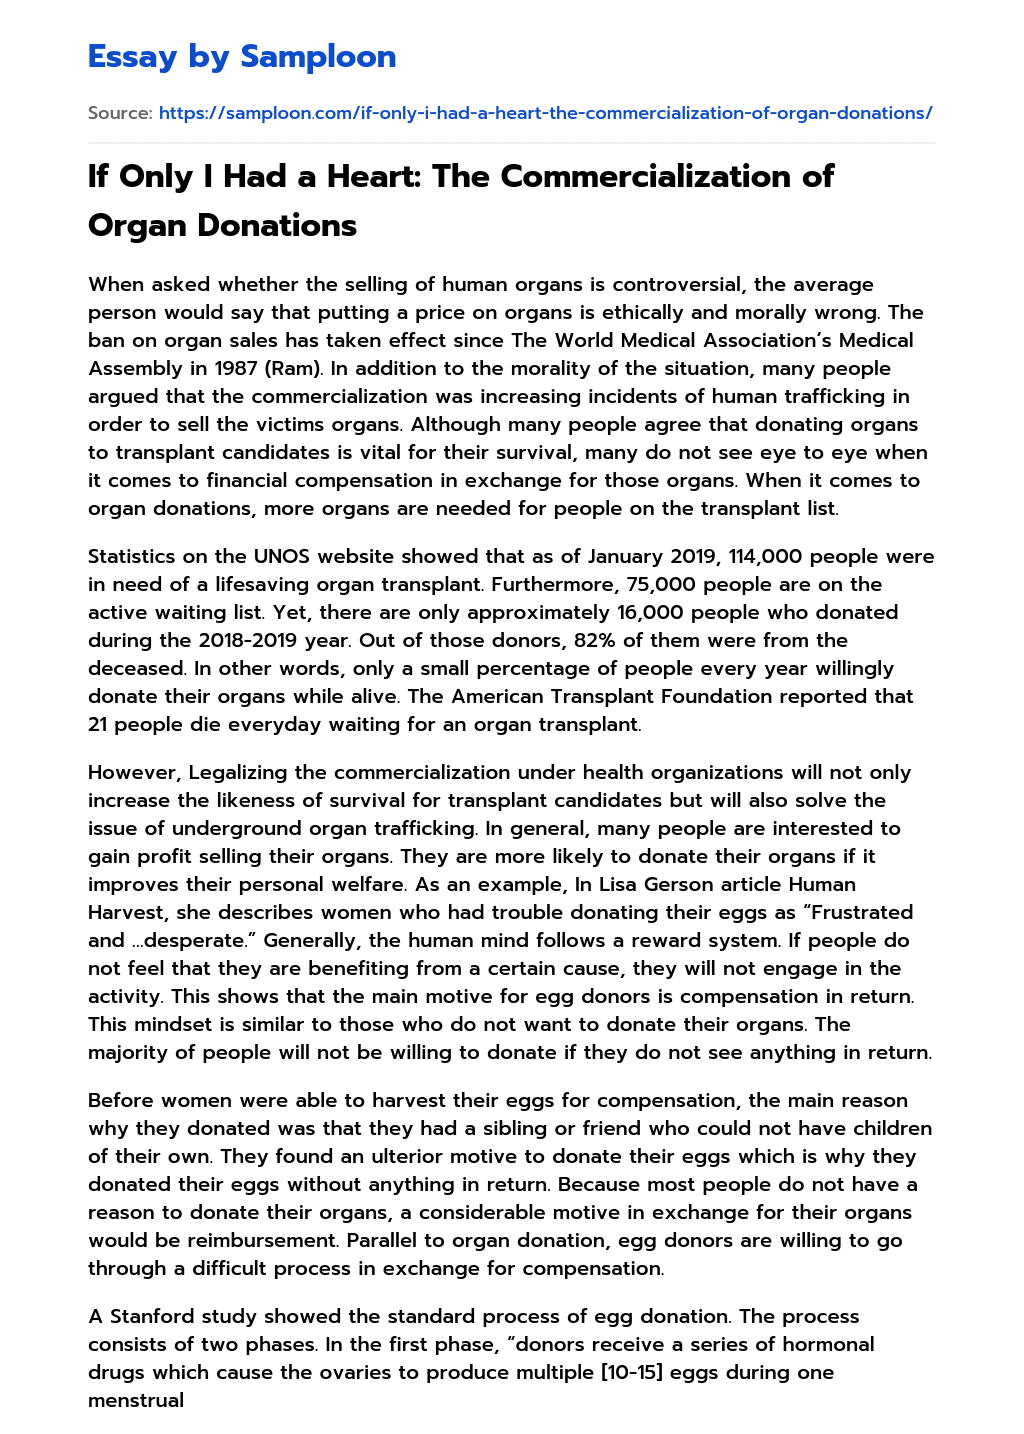 If Only I Had a Heart: The Commercialization of Organ Donations essay